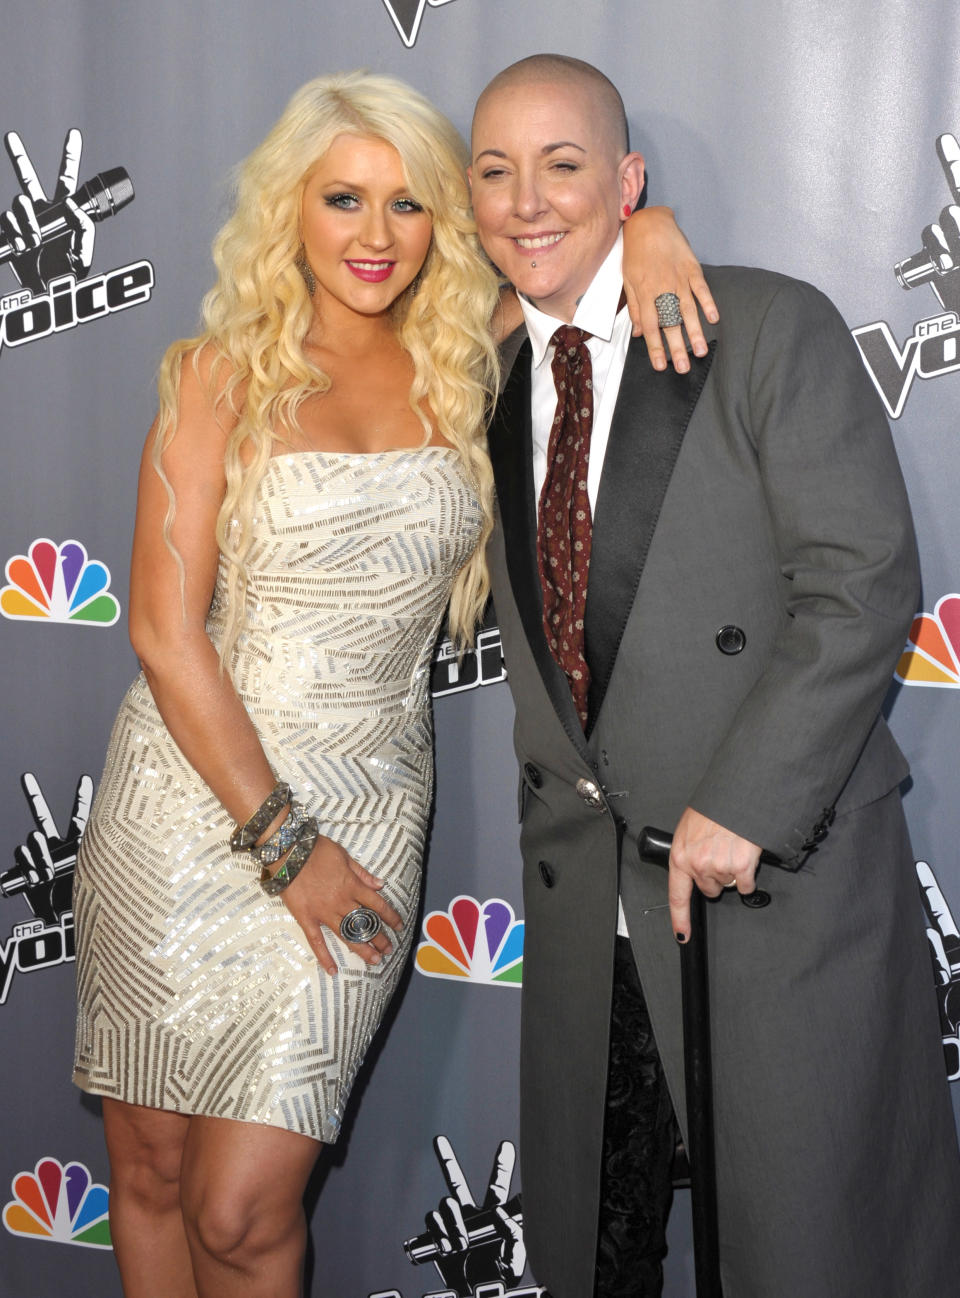 Christina Aguilera and Beverly McClellan attend NBC’s <em>The Voice</em> finale viewing party on June 29, 2011, in Burbank, Calif. (Photo: John Shearer/WireImage)